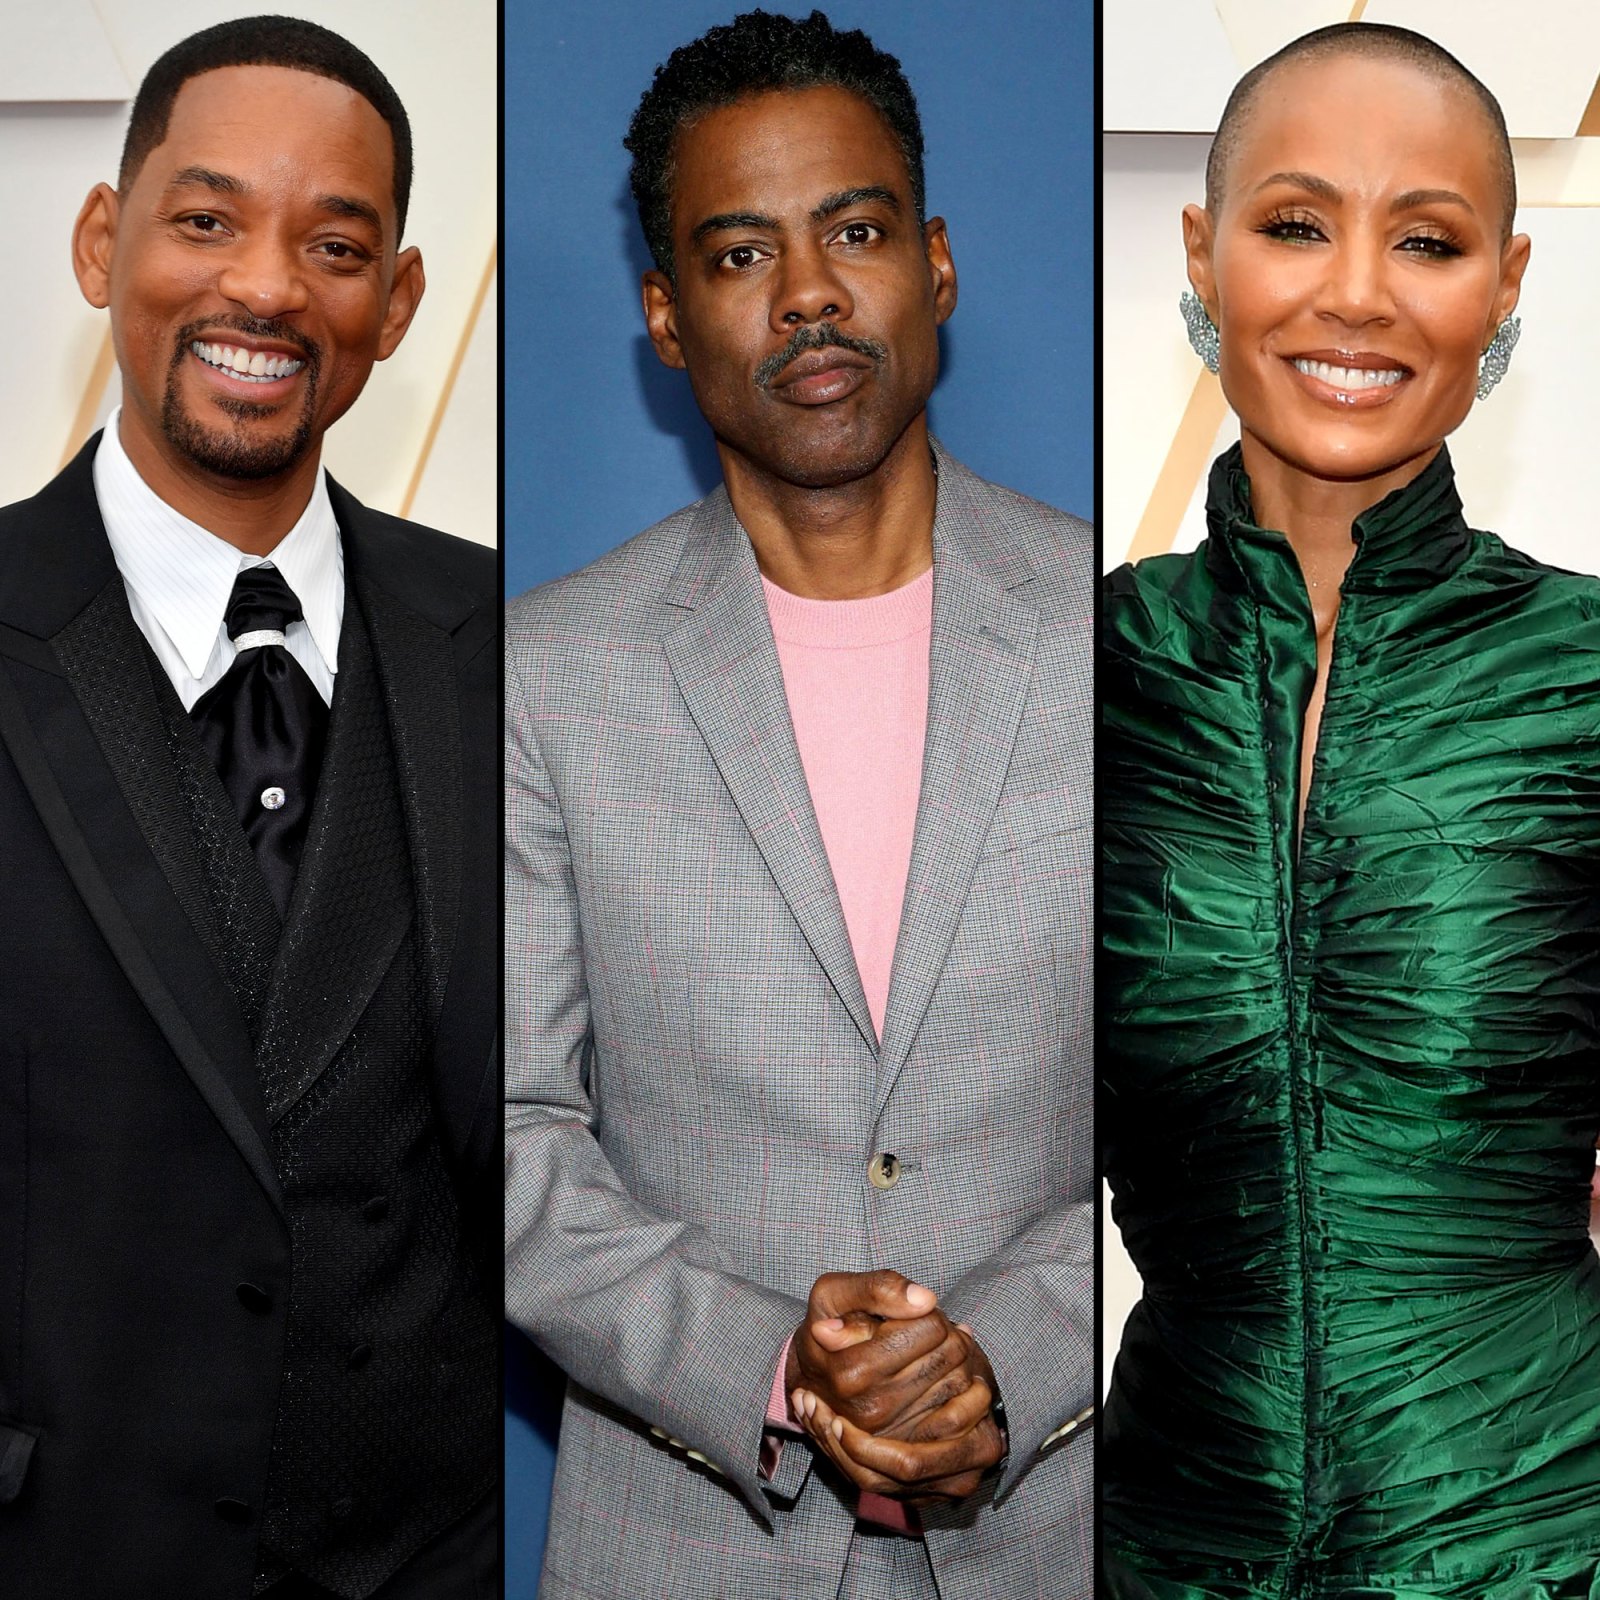 Will Smith and Chris Rock's Oscars 2022 Incident: Everything to Know